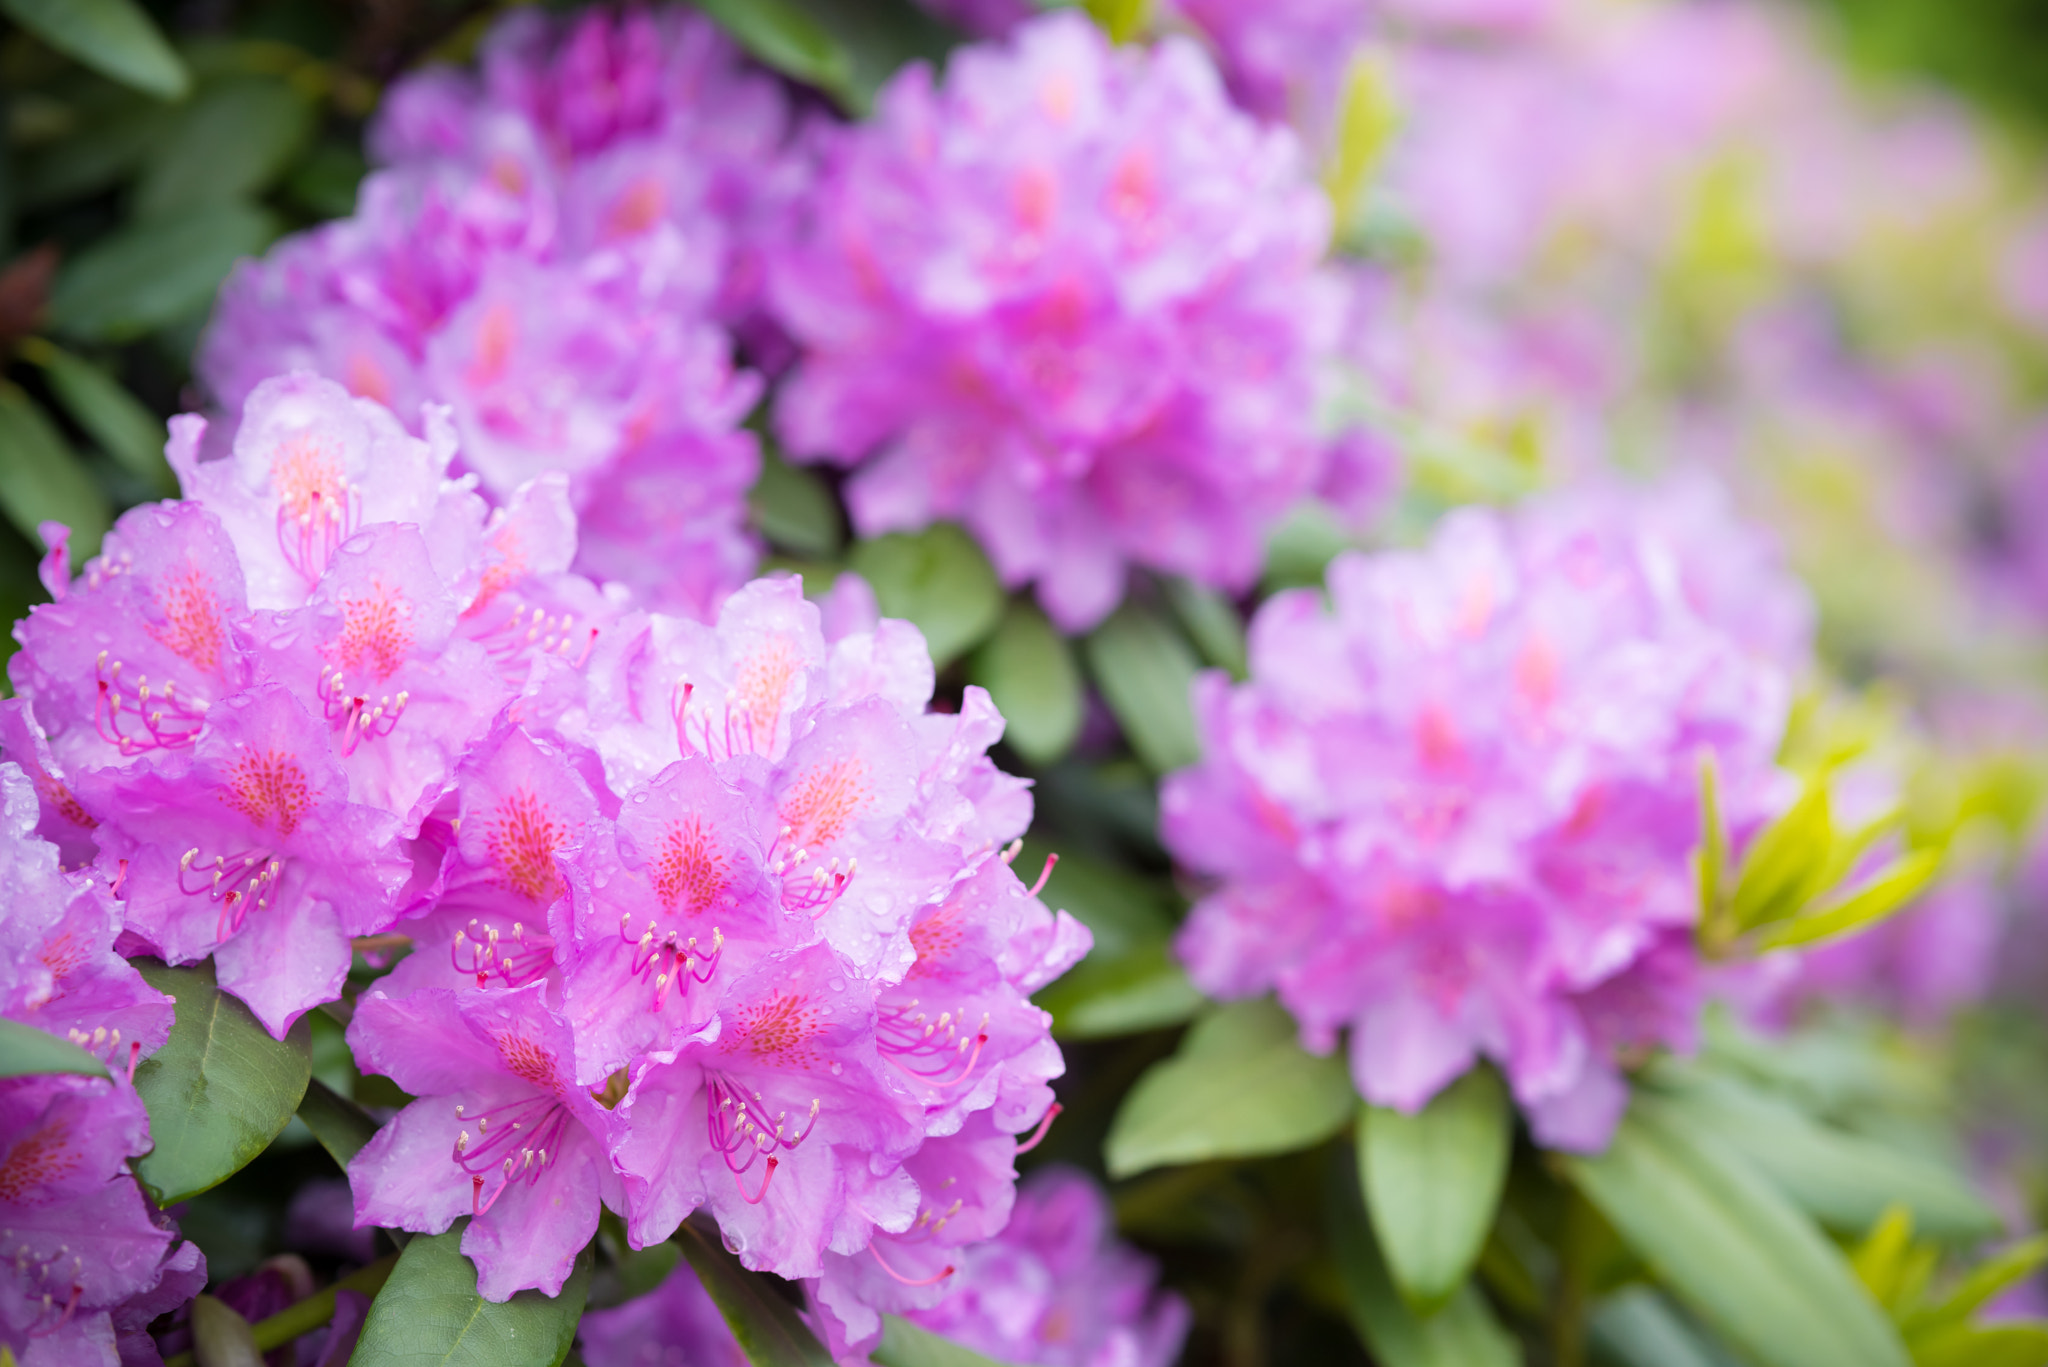 Pentax K-1 sample photo. Blooming pink rhododendron flower photography